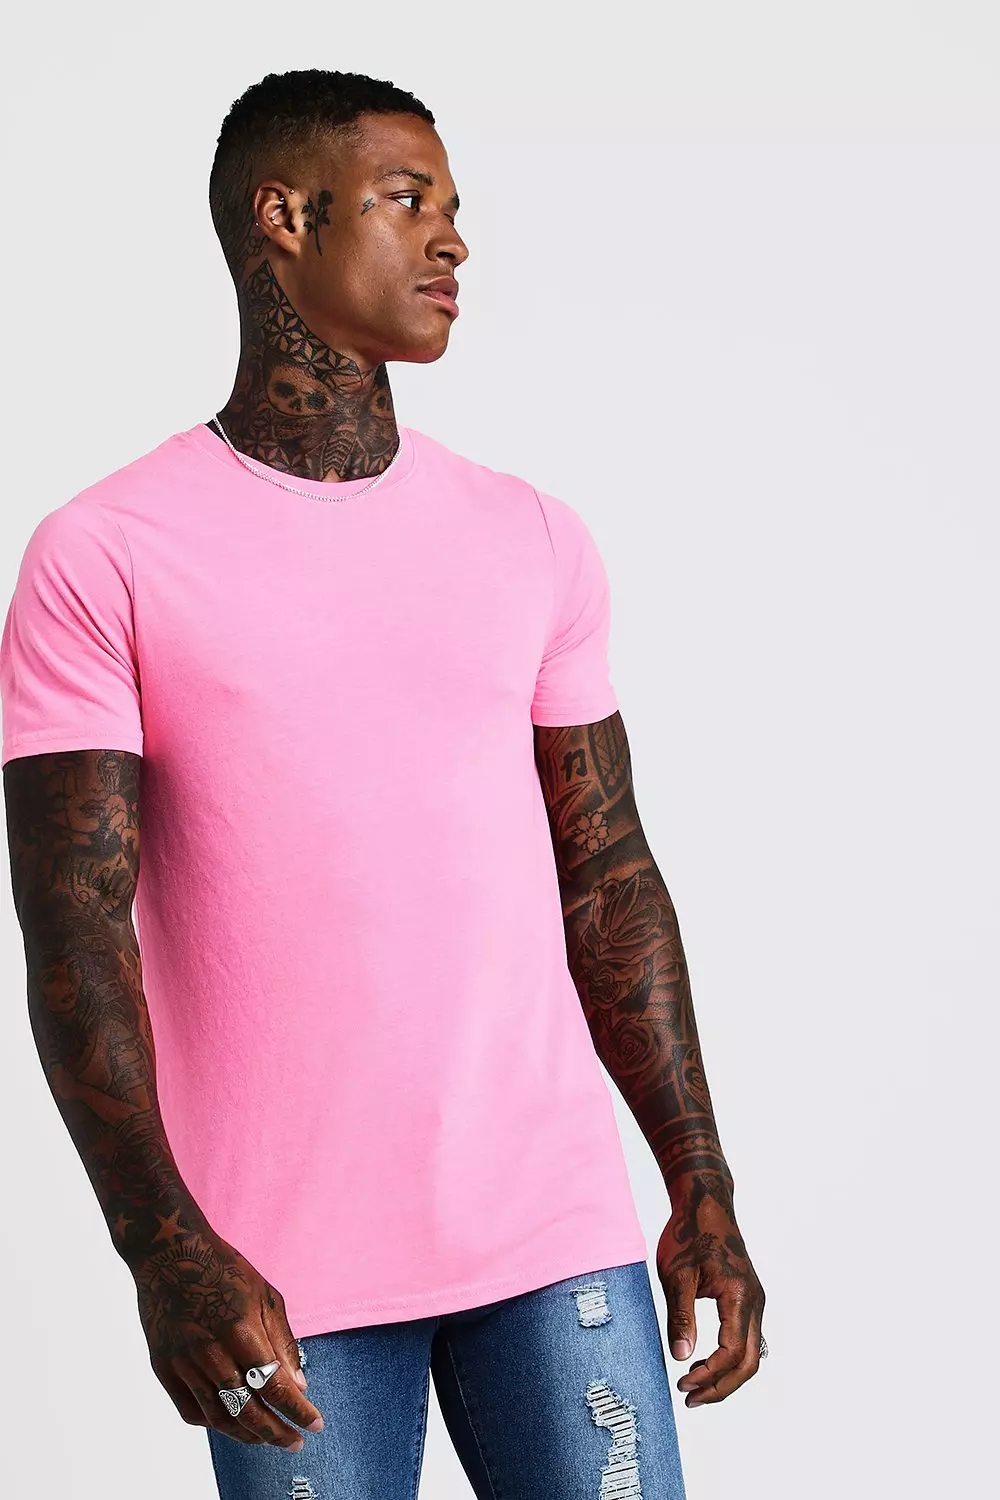 T-Shirt Men Rhinestone Pink Shirt Large Size 4XL New 2023 Summer  Personalized Trend High Quality Short Sleeve Tees Male Top